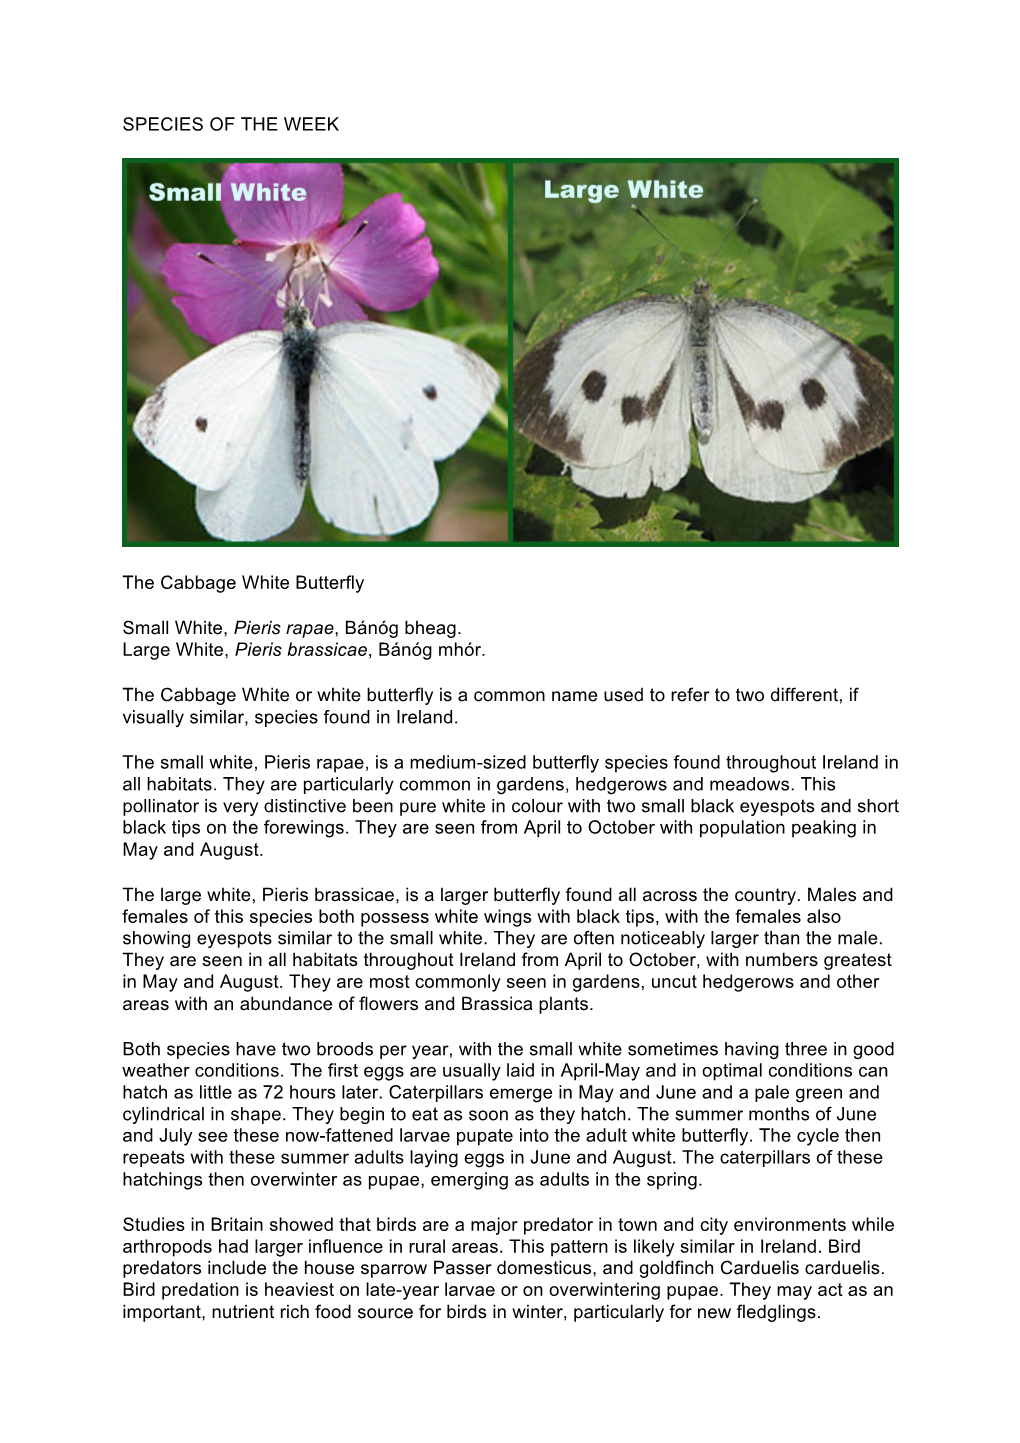 SPECIES of the WEEK the Cabbage White Butterfly Small White, Pieris Rapae, Bánóg Bheag. Large White, Pieris Brassicae, Bánóg